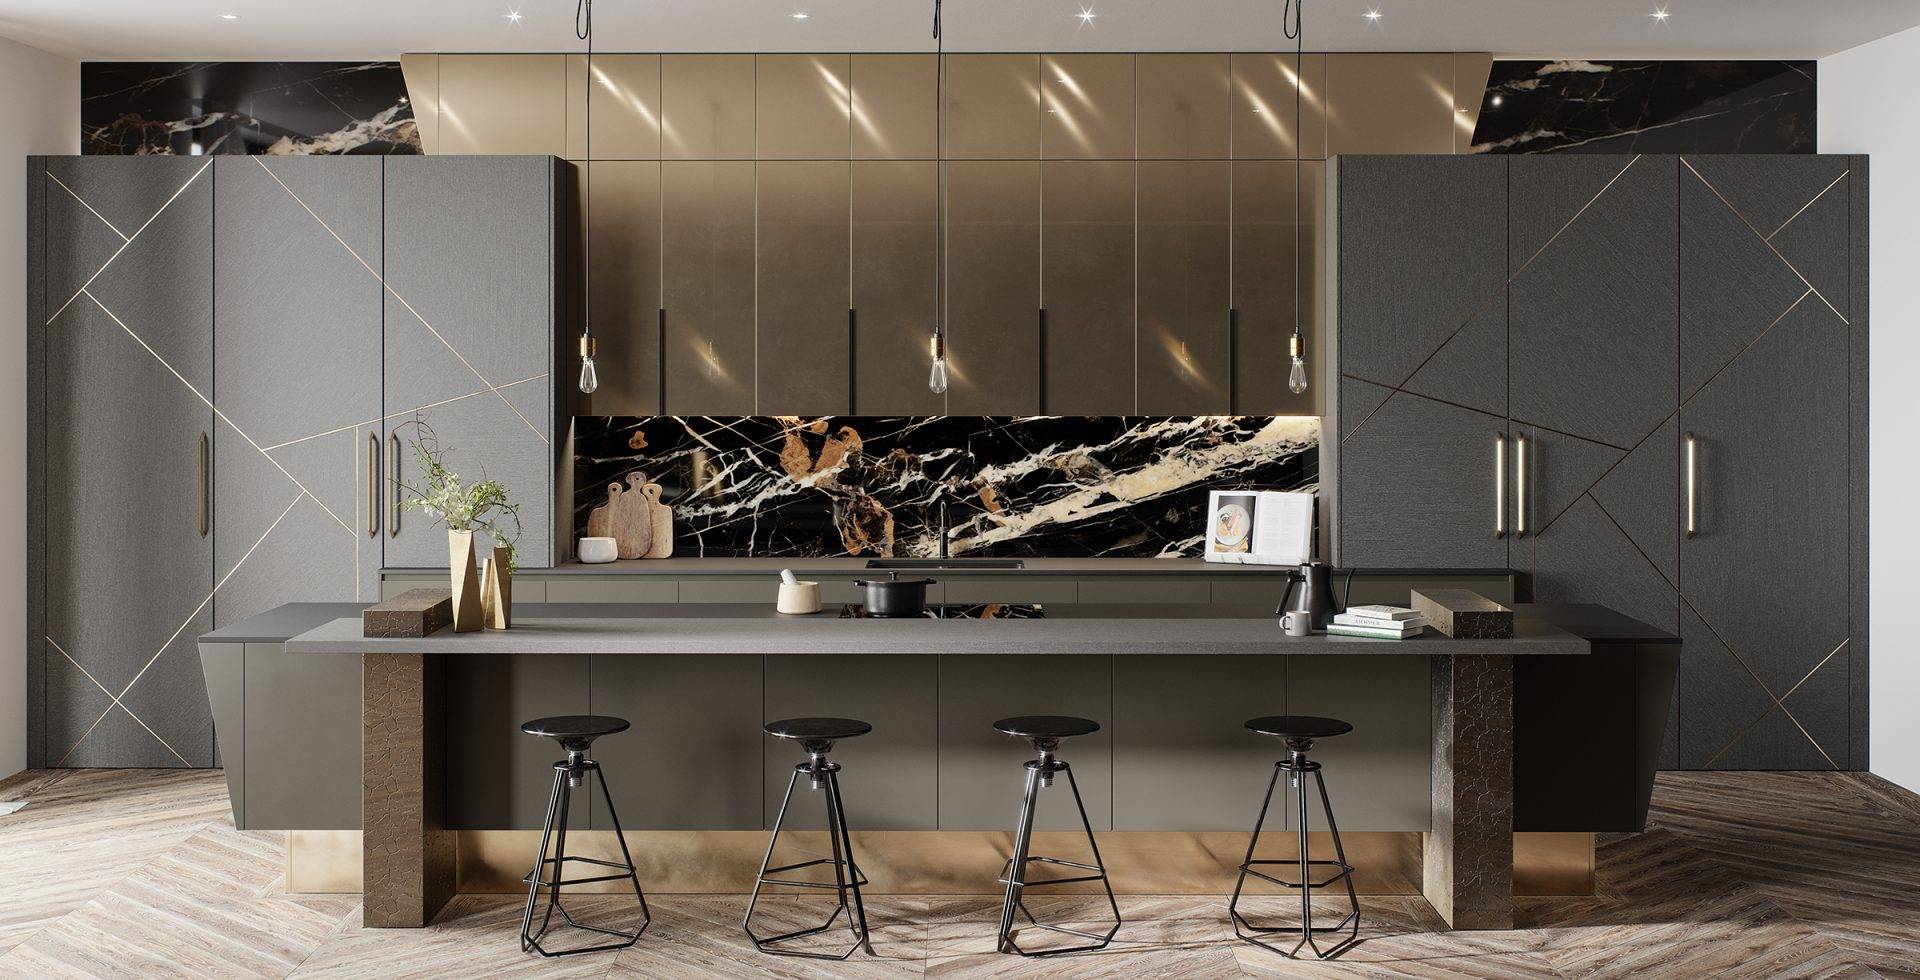 Gourmet Kitchens: The Ideal Kitchen Design for Homeowners Who Actually Cook